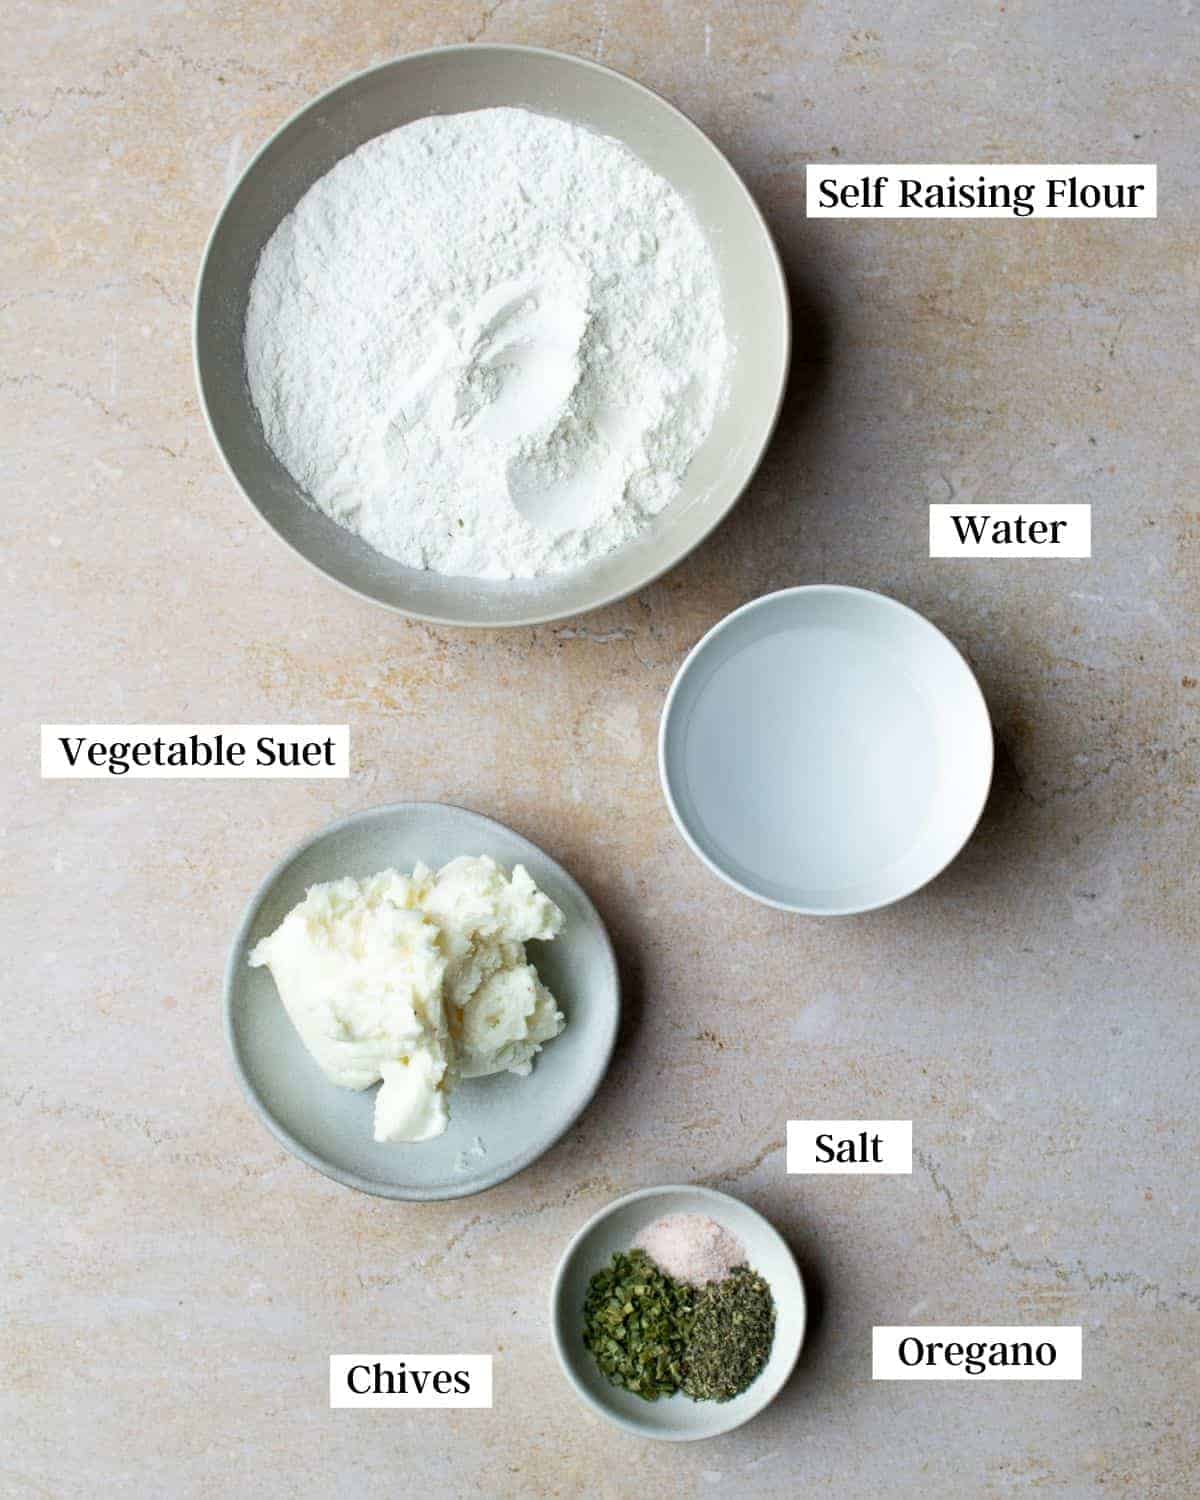 Ingredients in bowls, labelled with text.